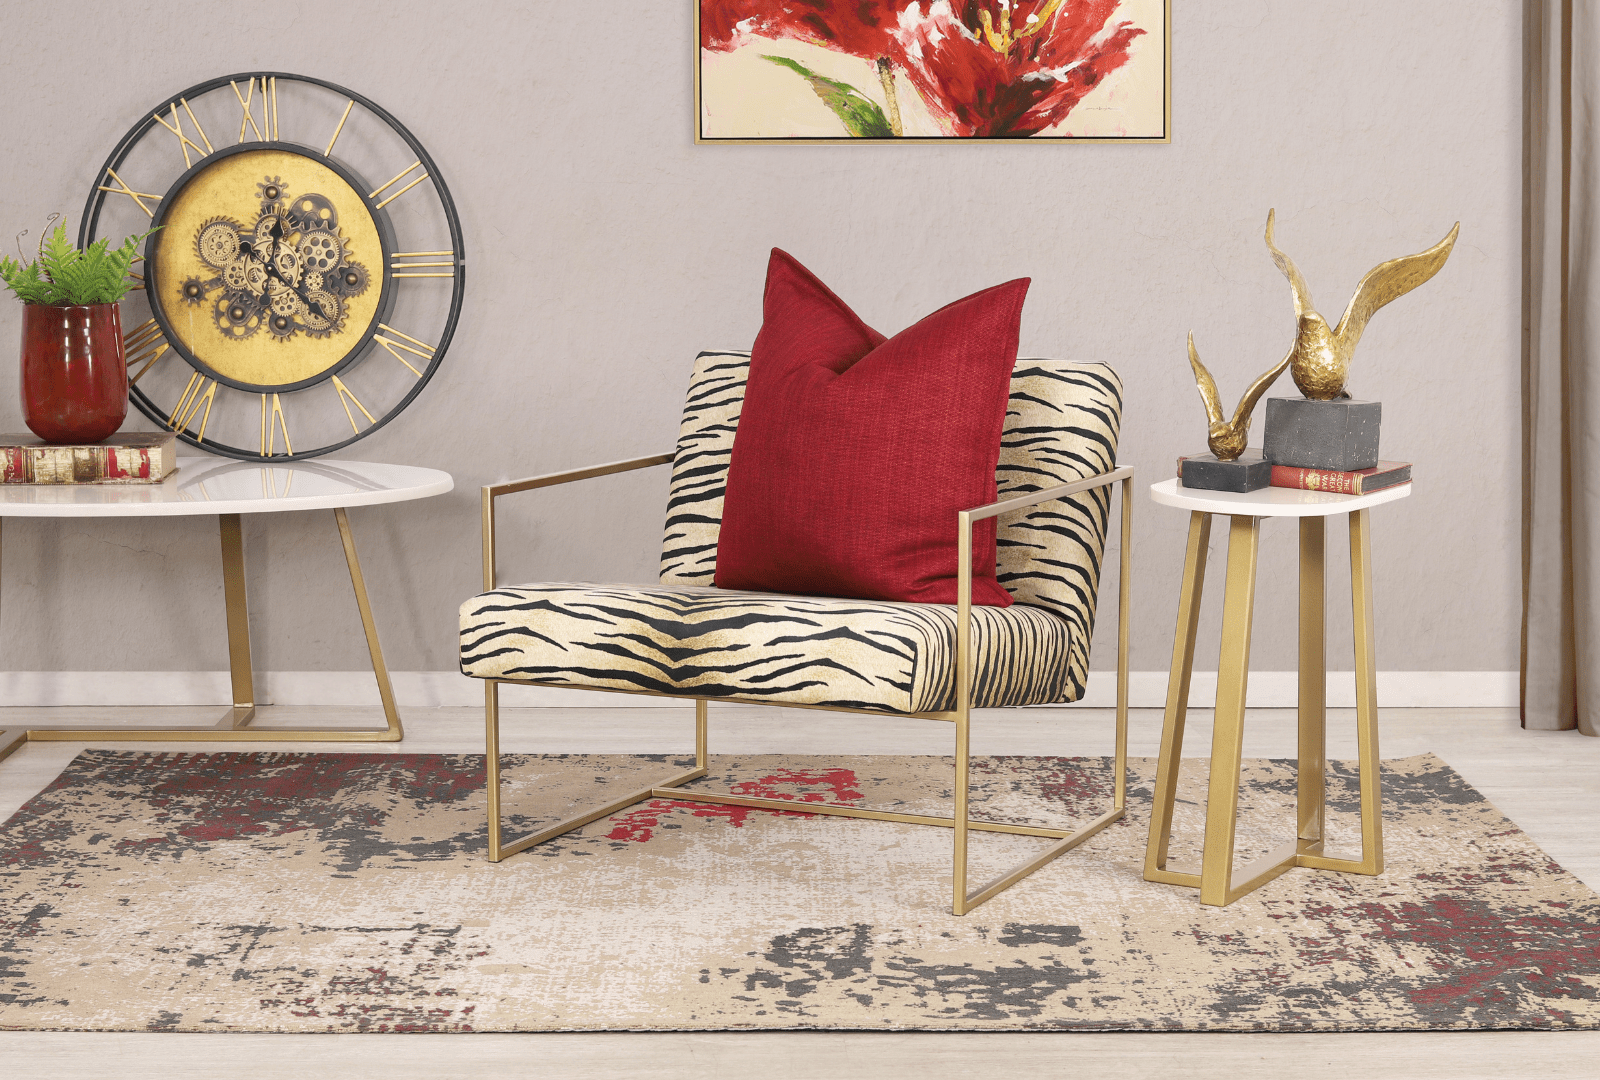 Explore Cosy Comfort and Style with the Gilmore Occasional Chairs Range!